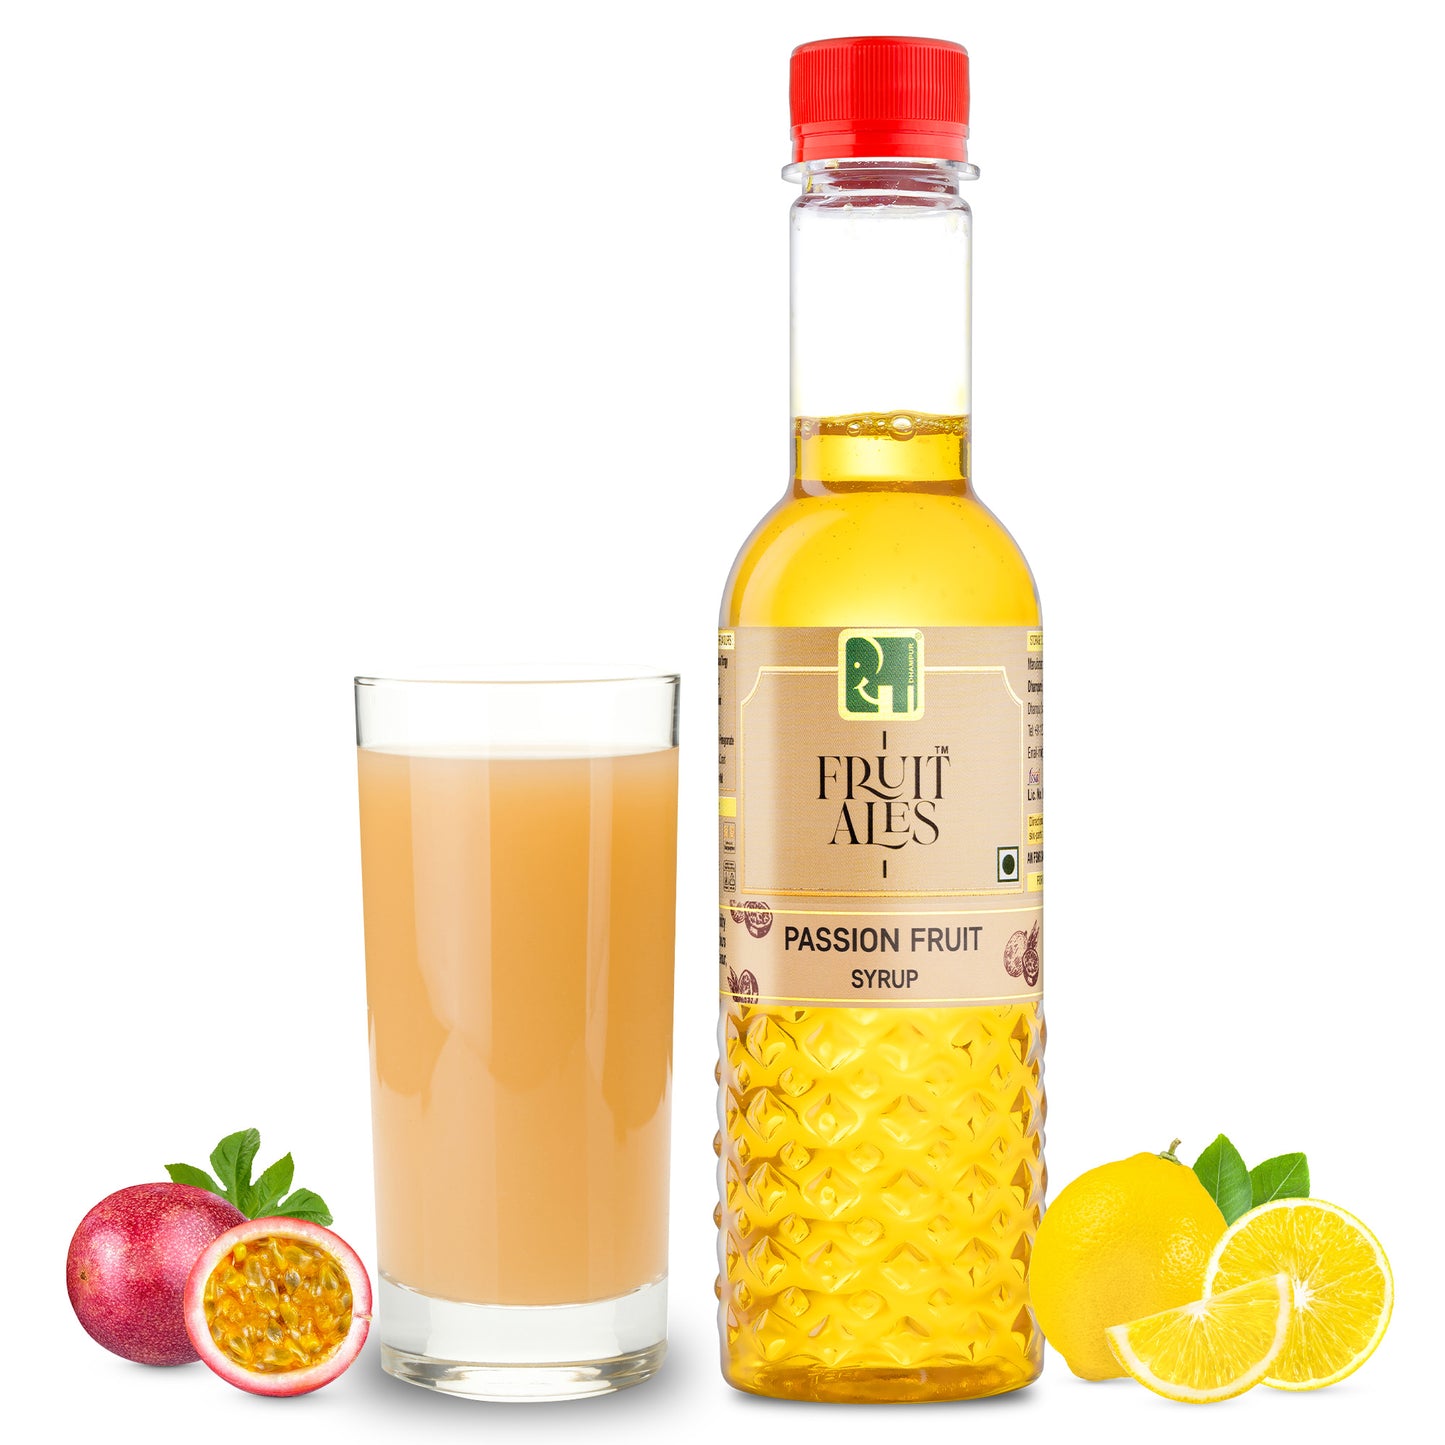 
                  
                    Mocktail Syrups Combo - Lemon Litchi, Passion Fruit, Strawberry Litchi & Blue Curacao Syrup (4 x 300ml)
                  
                